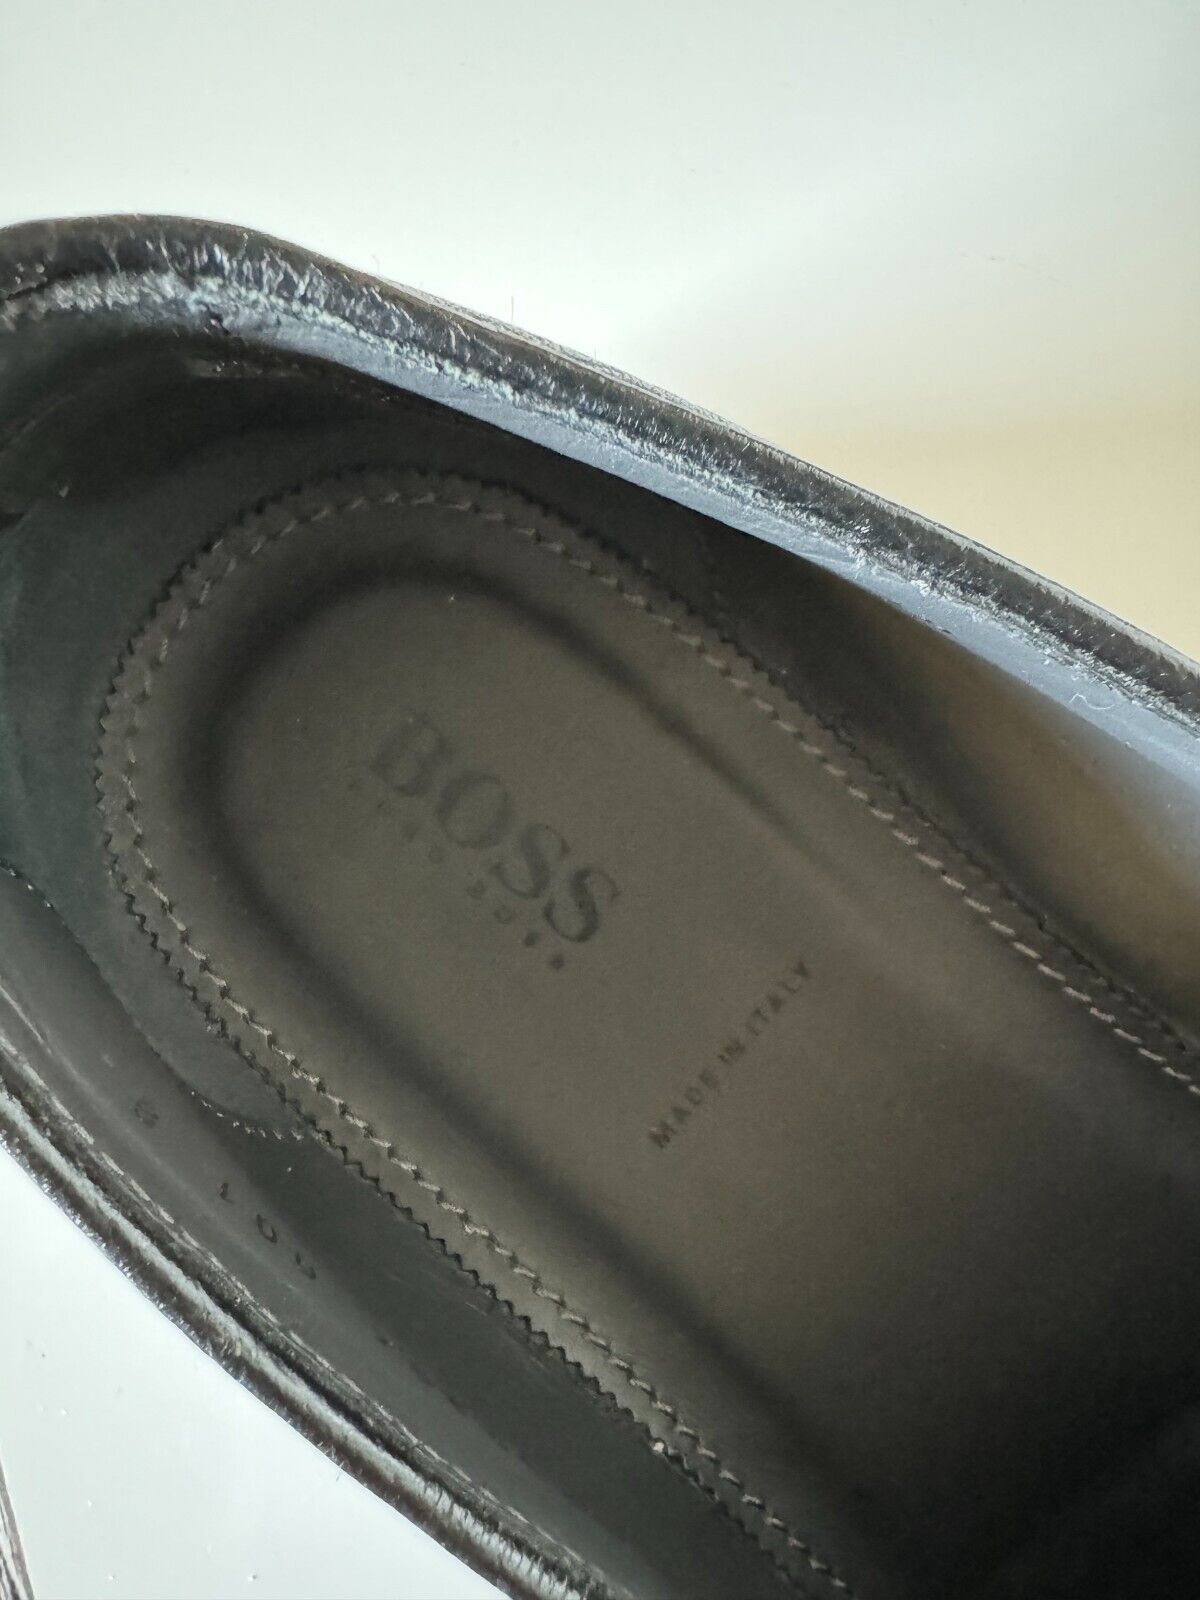 Boss Hugo Boss Men's Black Loafer Leather Shoes 9 US (8 IT) Made in Italy